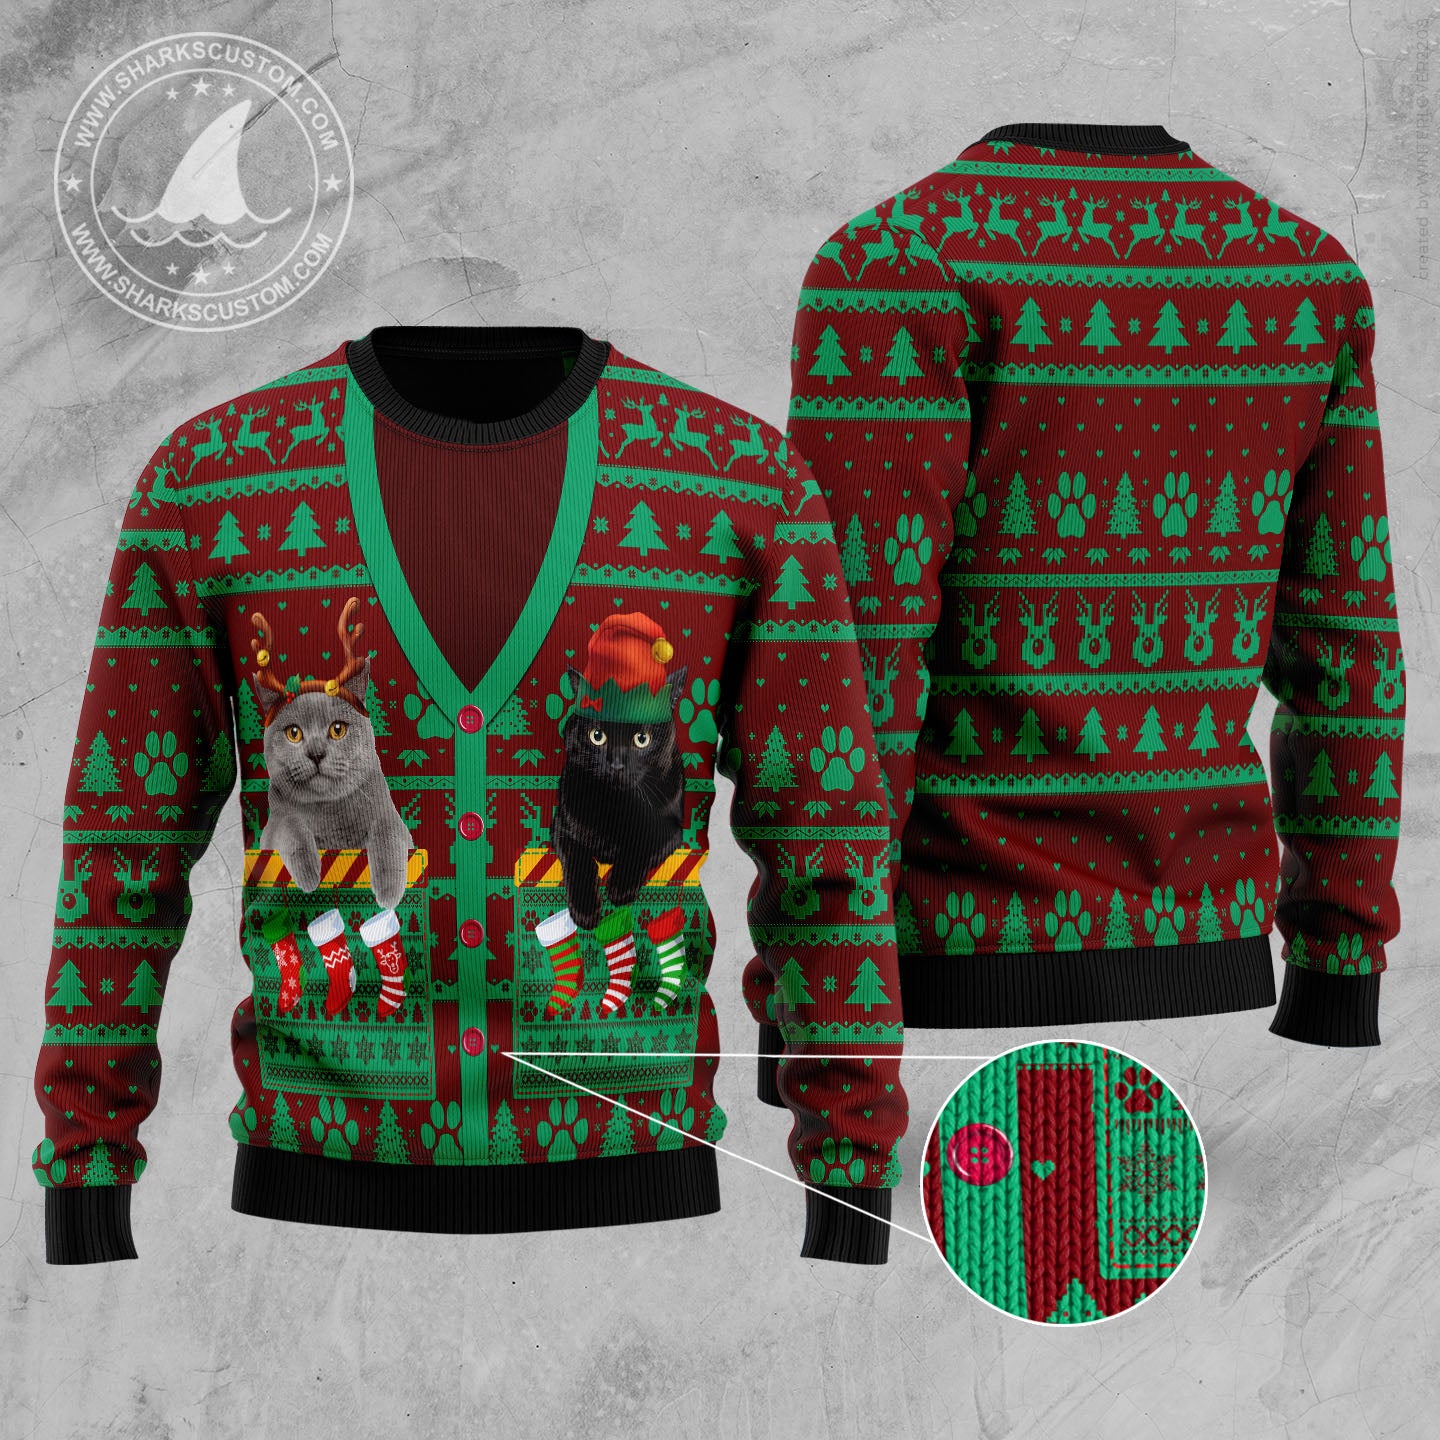 Booked is my Holiday D2610 Ugly Christmas Sweater